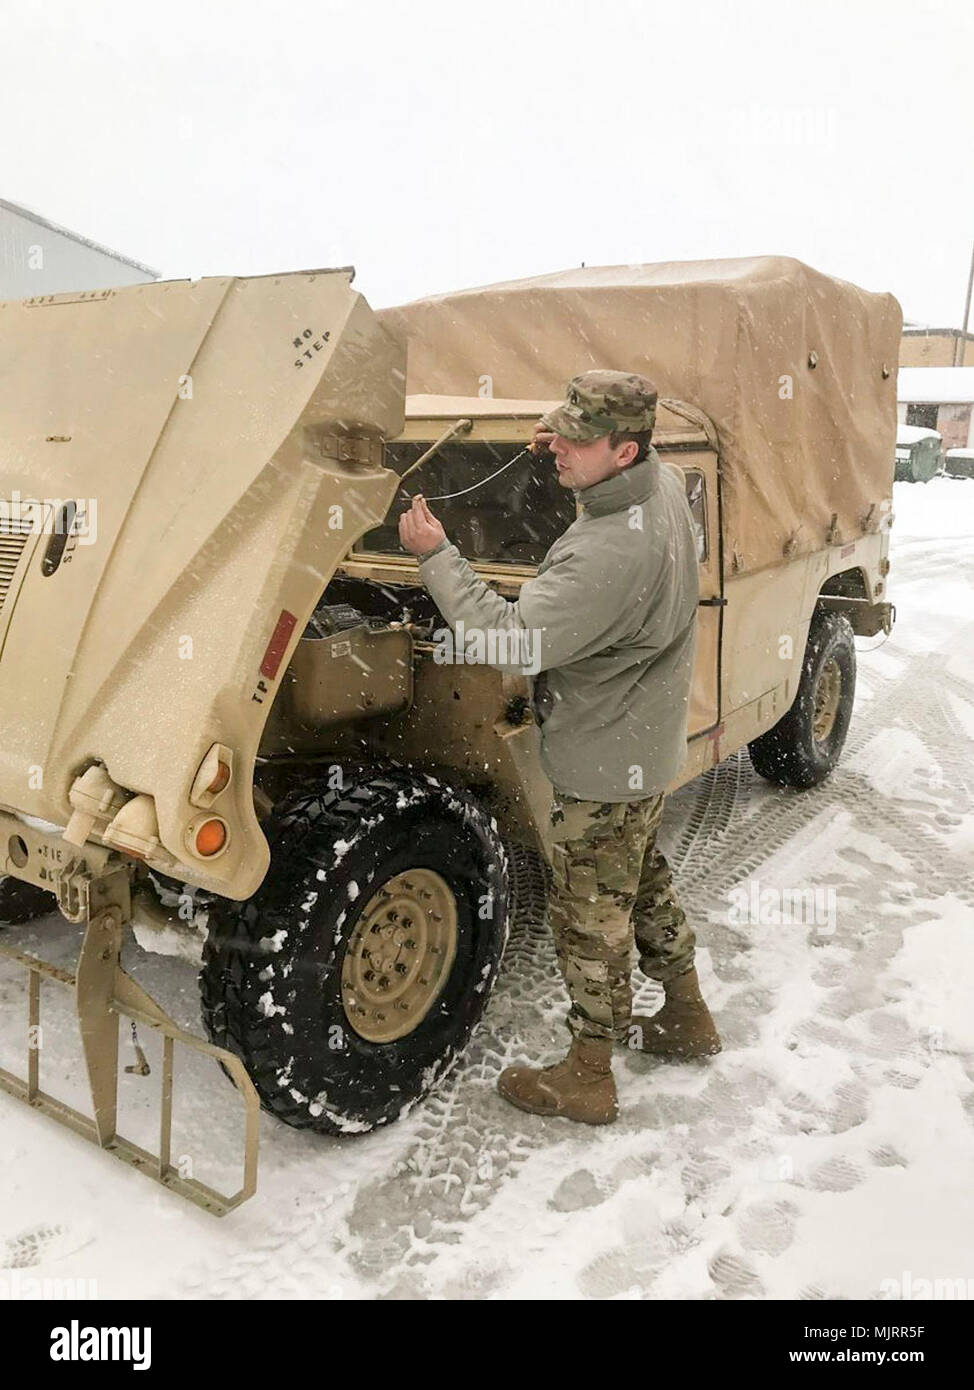 Staff Sgt. Robert Beard with the 3622nd Support Maintenance Company, 728th Combat Support Sustainment Battalion, 213th Regional Support Group, Pennsylvania Army National Guard, conducts preventive maintenance checks and services (PMCS) on his High Mobility Multipurpose Wheeled Vehicle (Humvee) in preparation for mission support during Winter Storm Toby March 21 in Spring City, Pa. Armed Forces and civilians displaying courage bravery dedication commitment and sacrifice Stock Photo